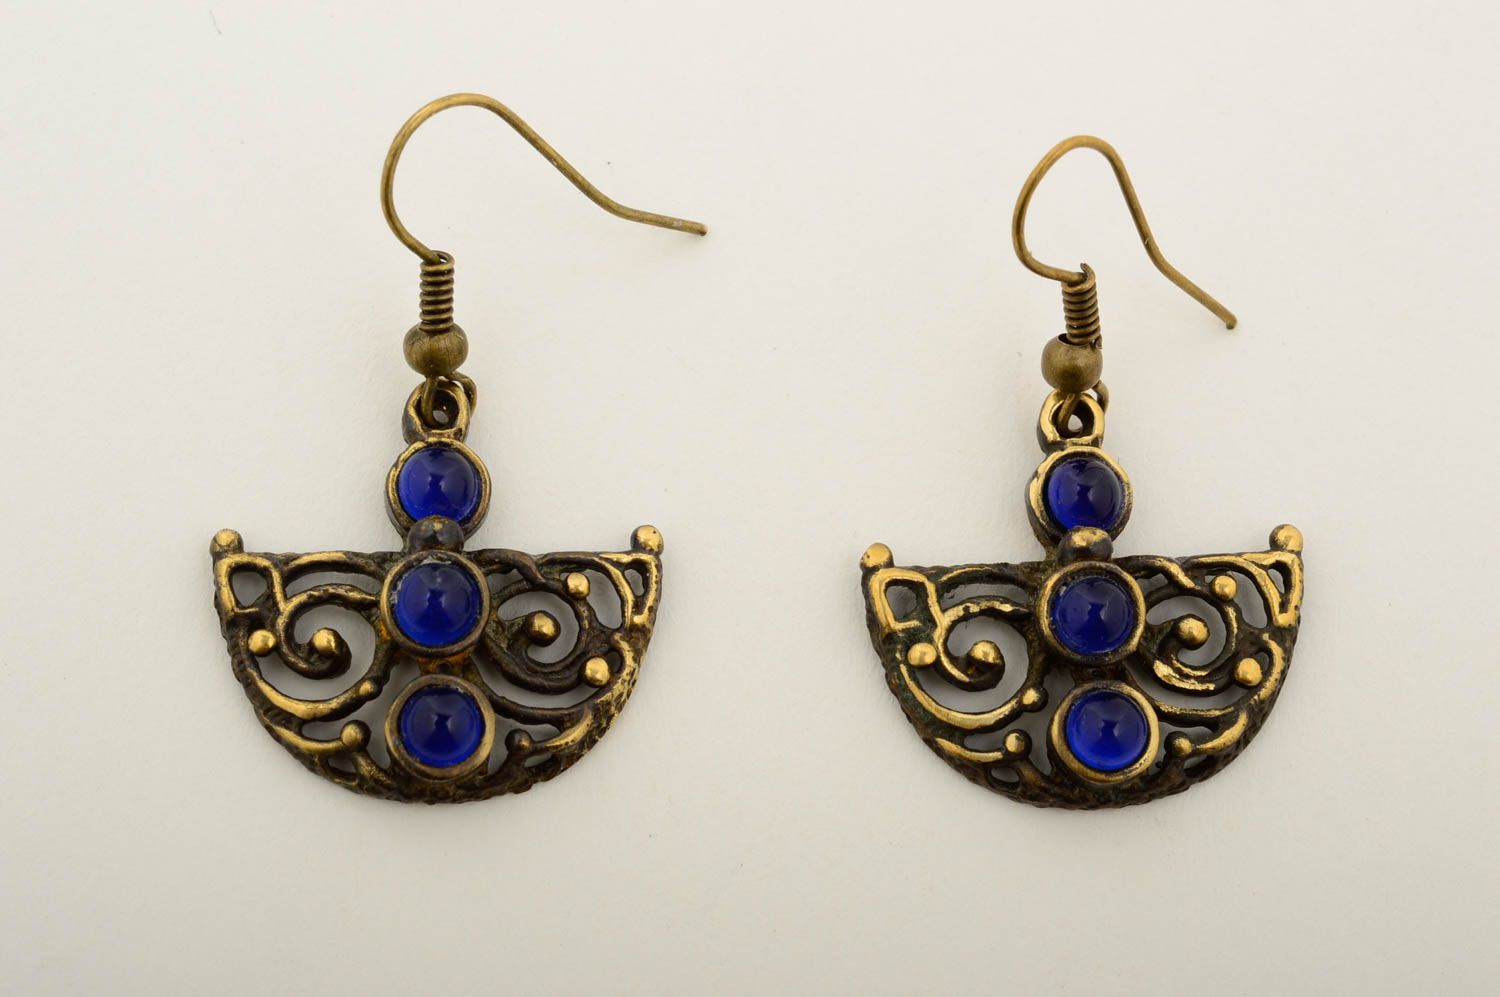 Unusual handmade bronze earrings costume jewelry designs gifts for her photo 3